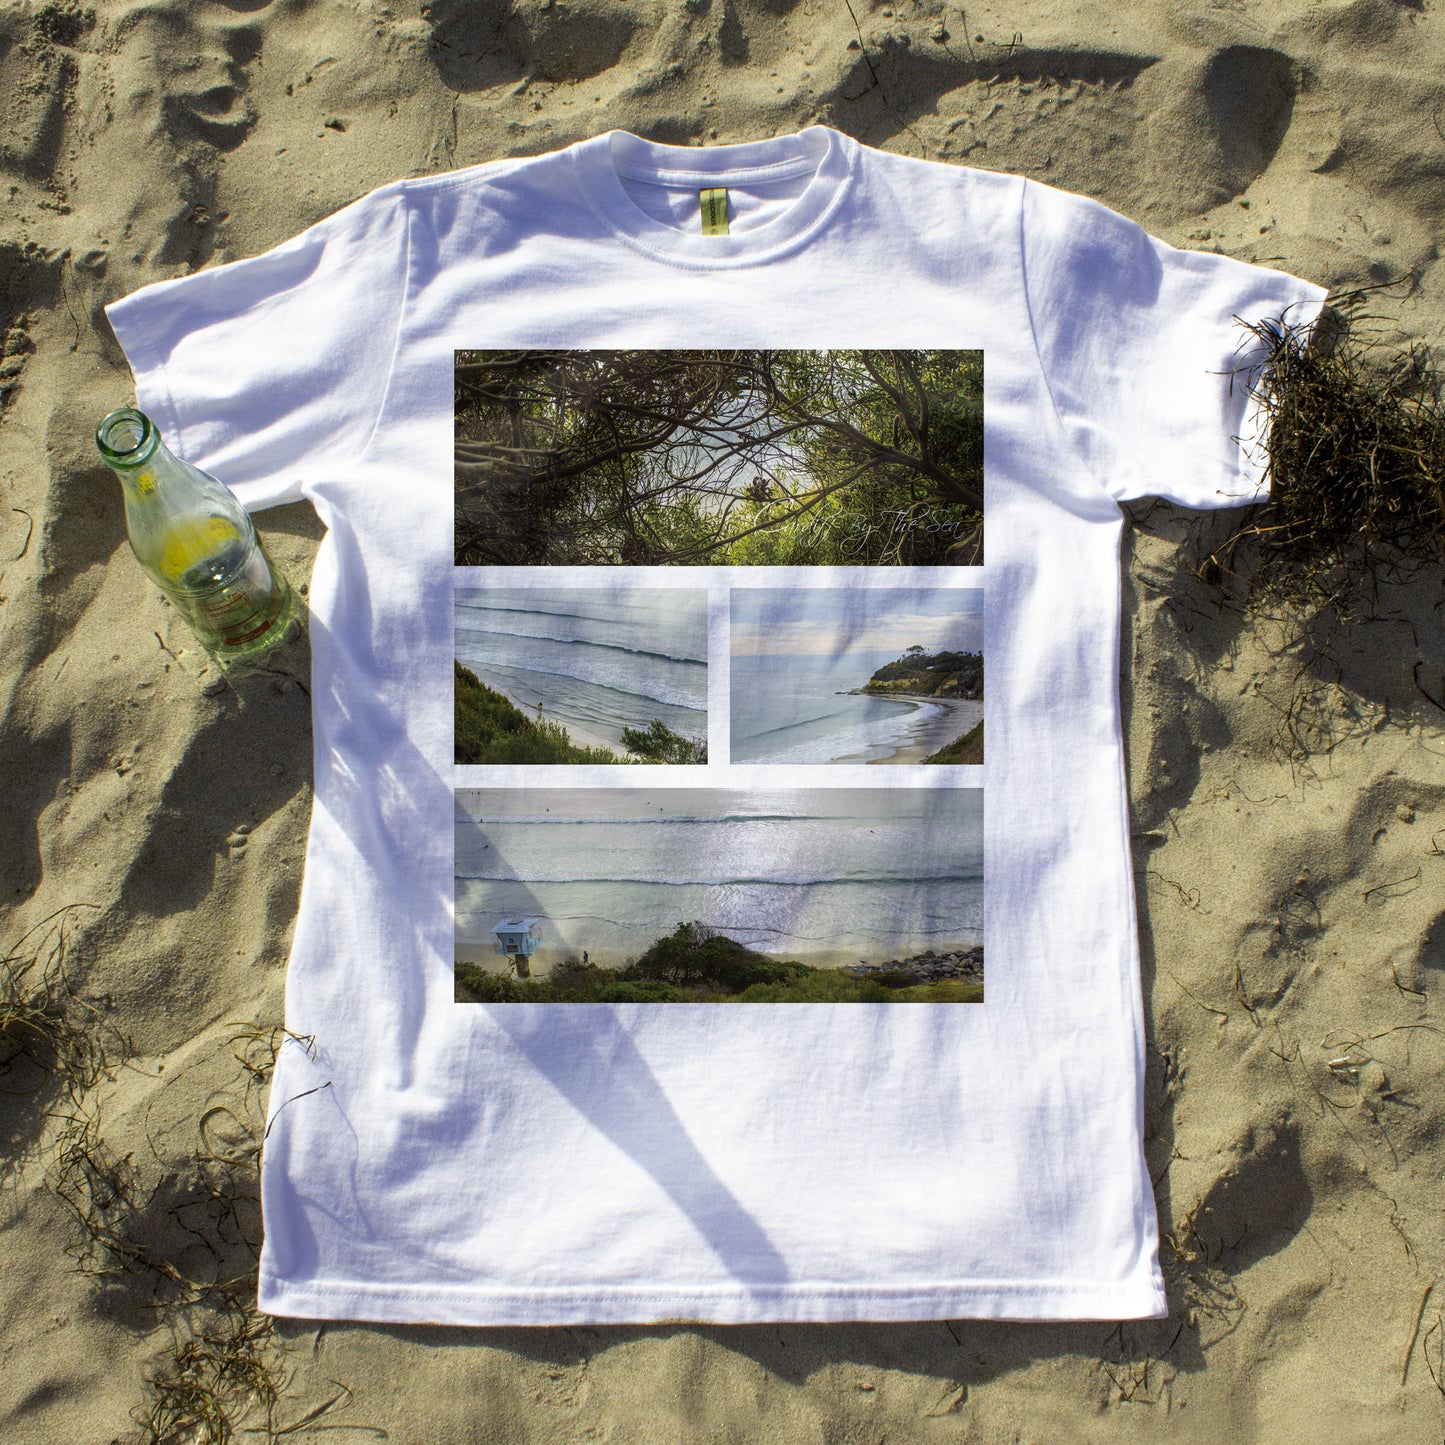 Cardiff-By-The-Sea Organic T-Shirt